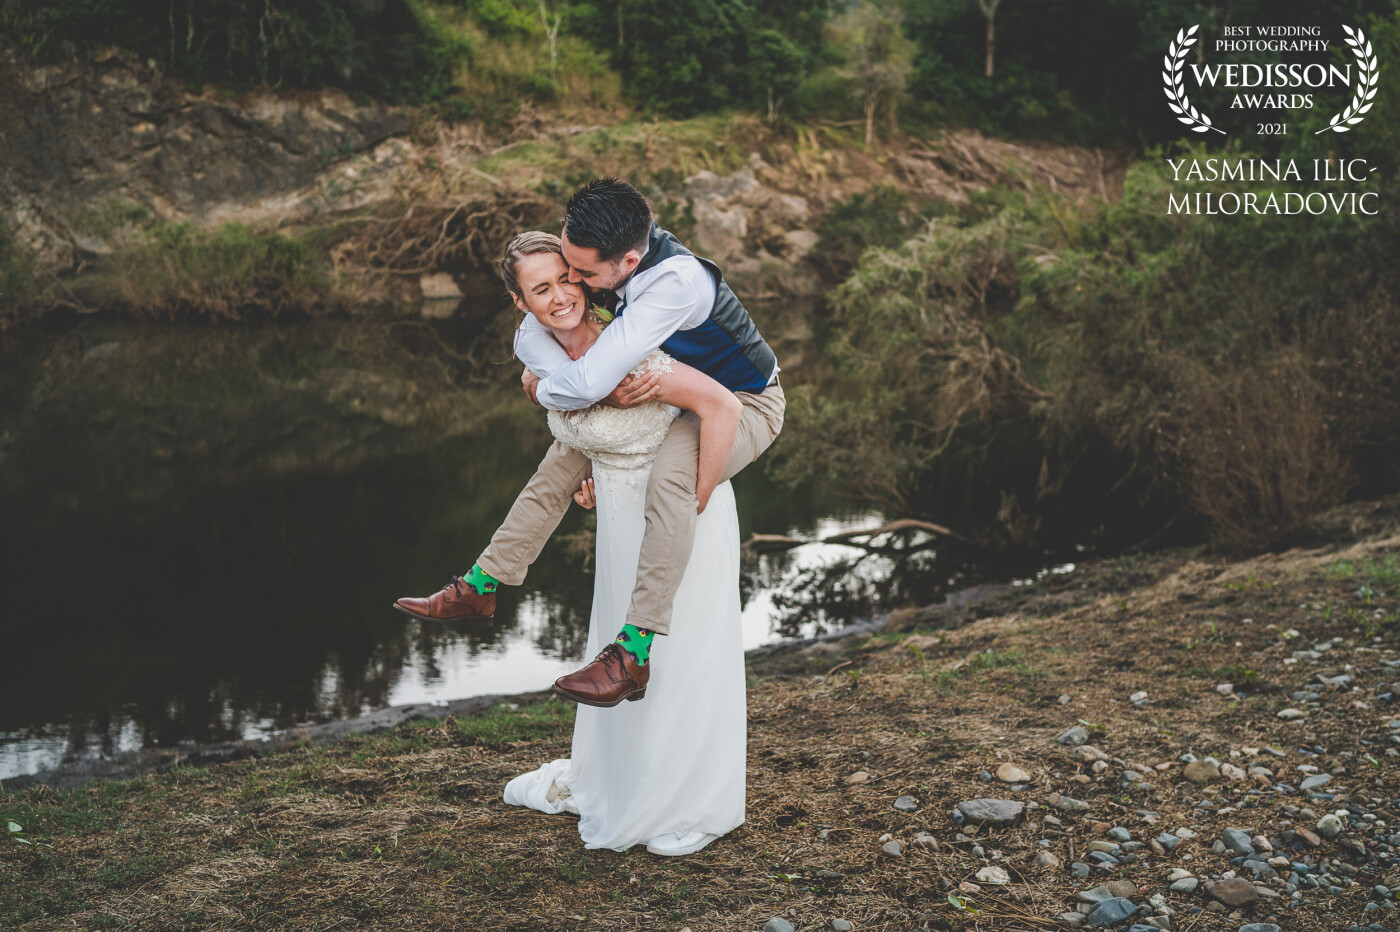 Martine and Ryan's wedding was absolutely full of laughs from beginning to end. Even I was in stitches! This is the spot they were meant to say their vows to one another however the week before there were insane floods and the beautiful bank was washed away. Caffreys Flat, NSW.